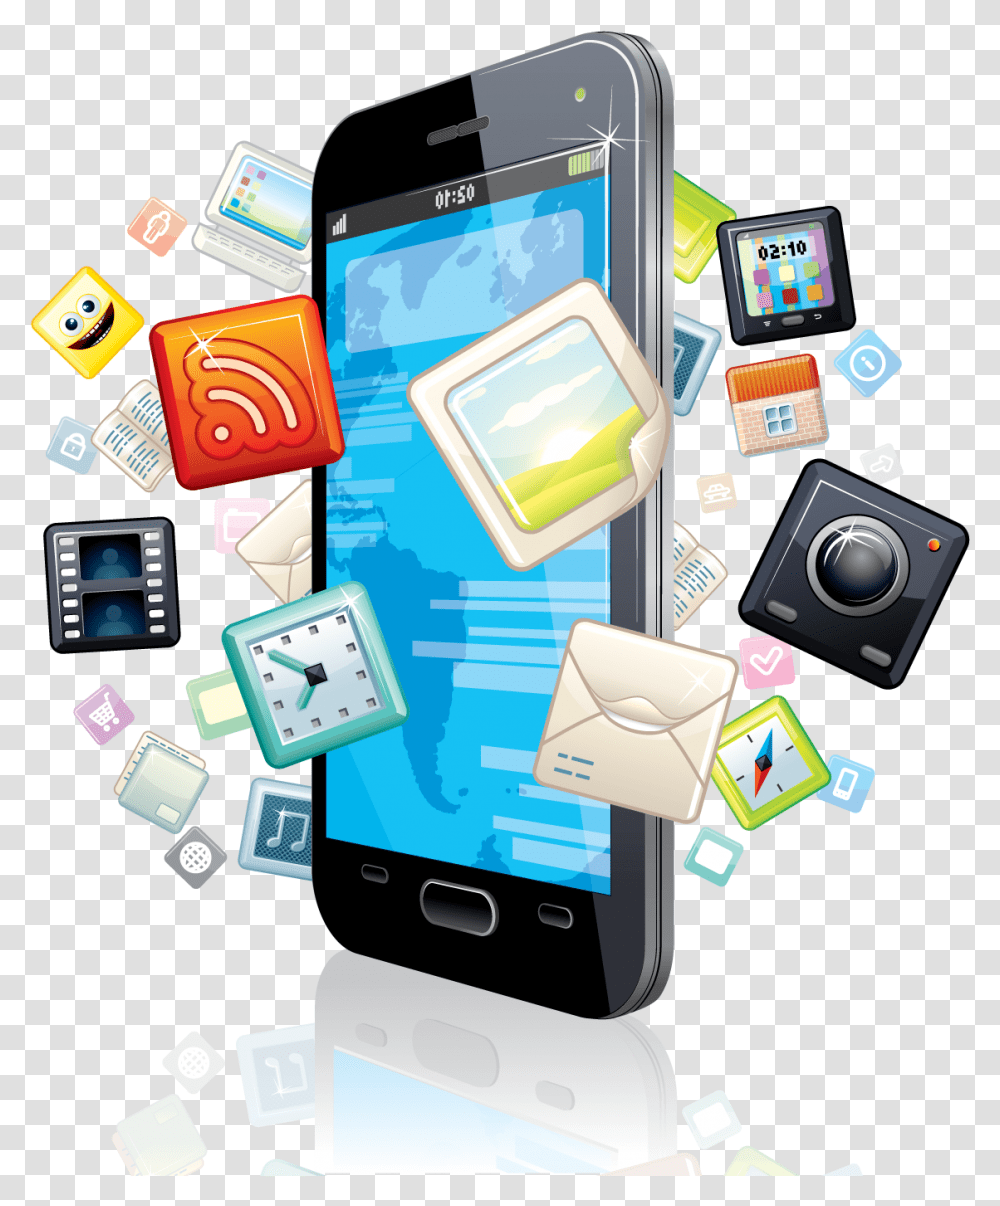 Download Smartphones 2013 Cell Phone Apps, Mobile Phone, Electronics, Computer, Electrical Device Transparent Png